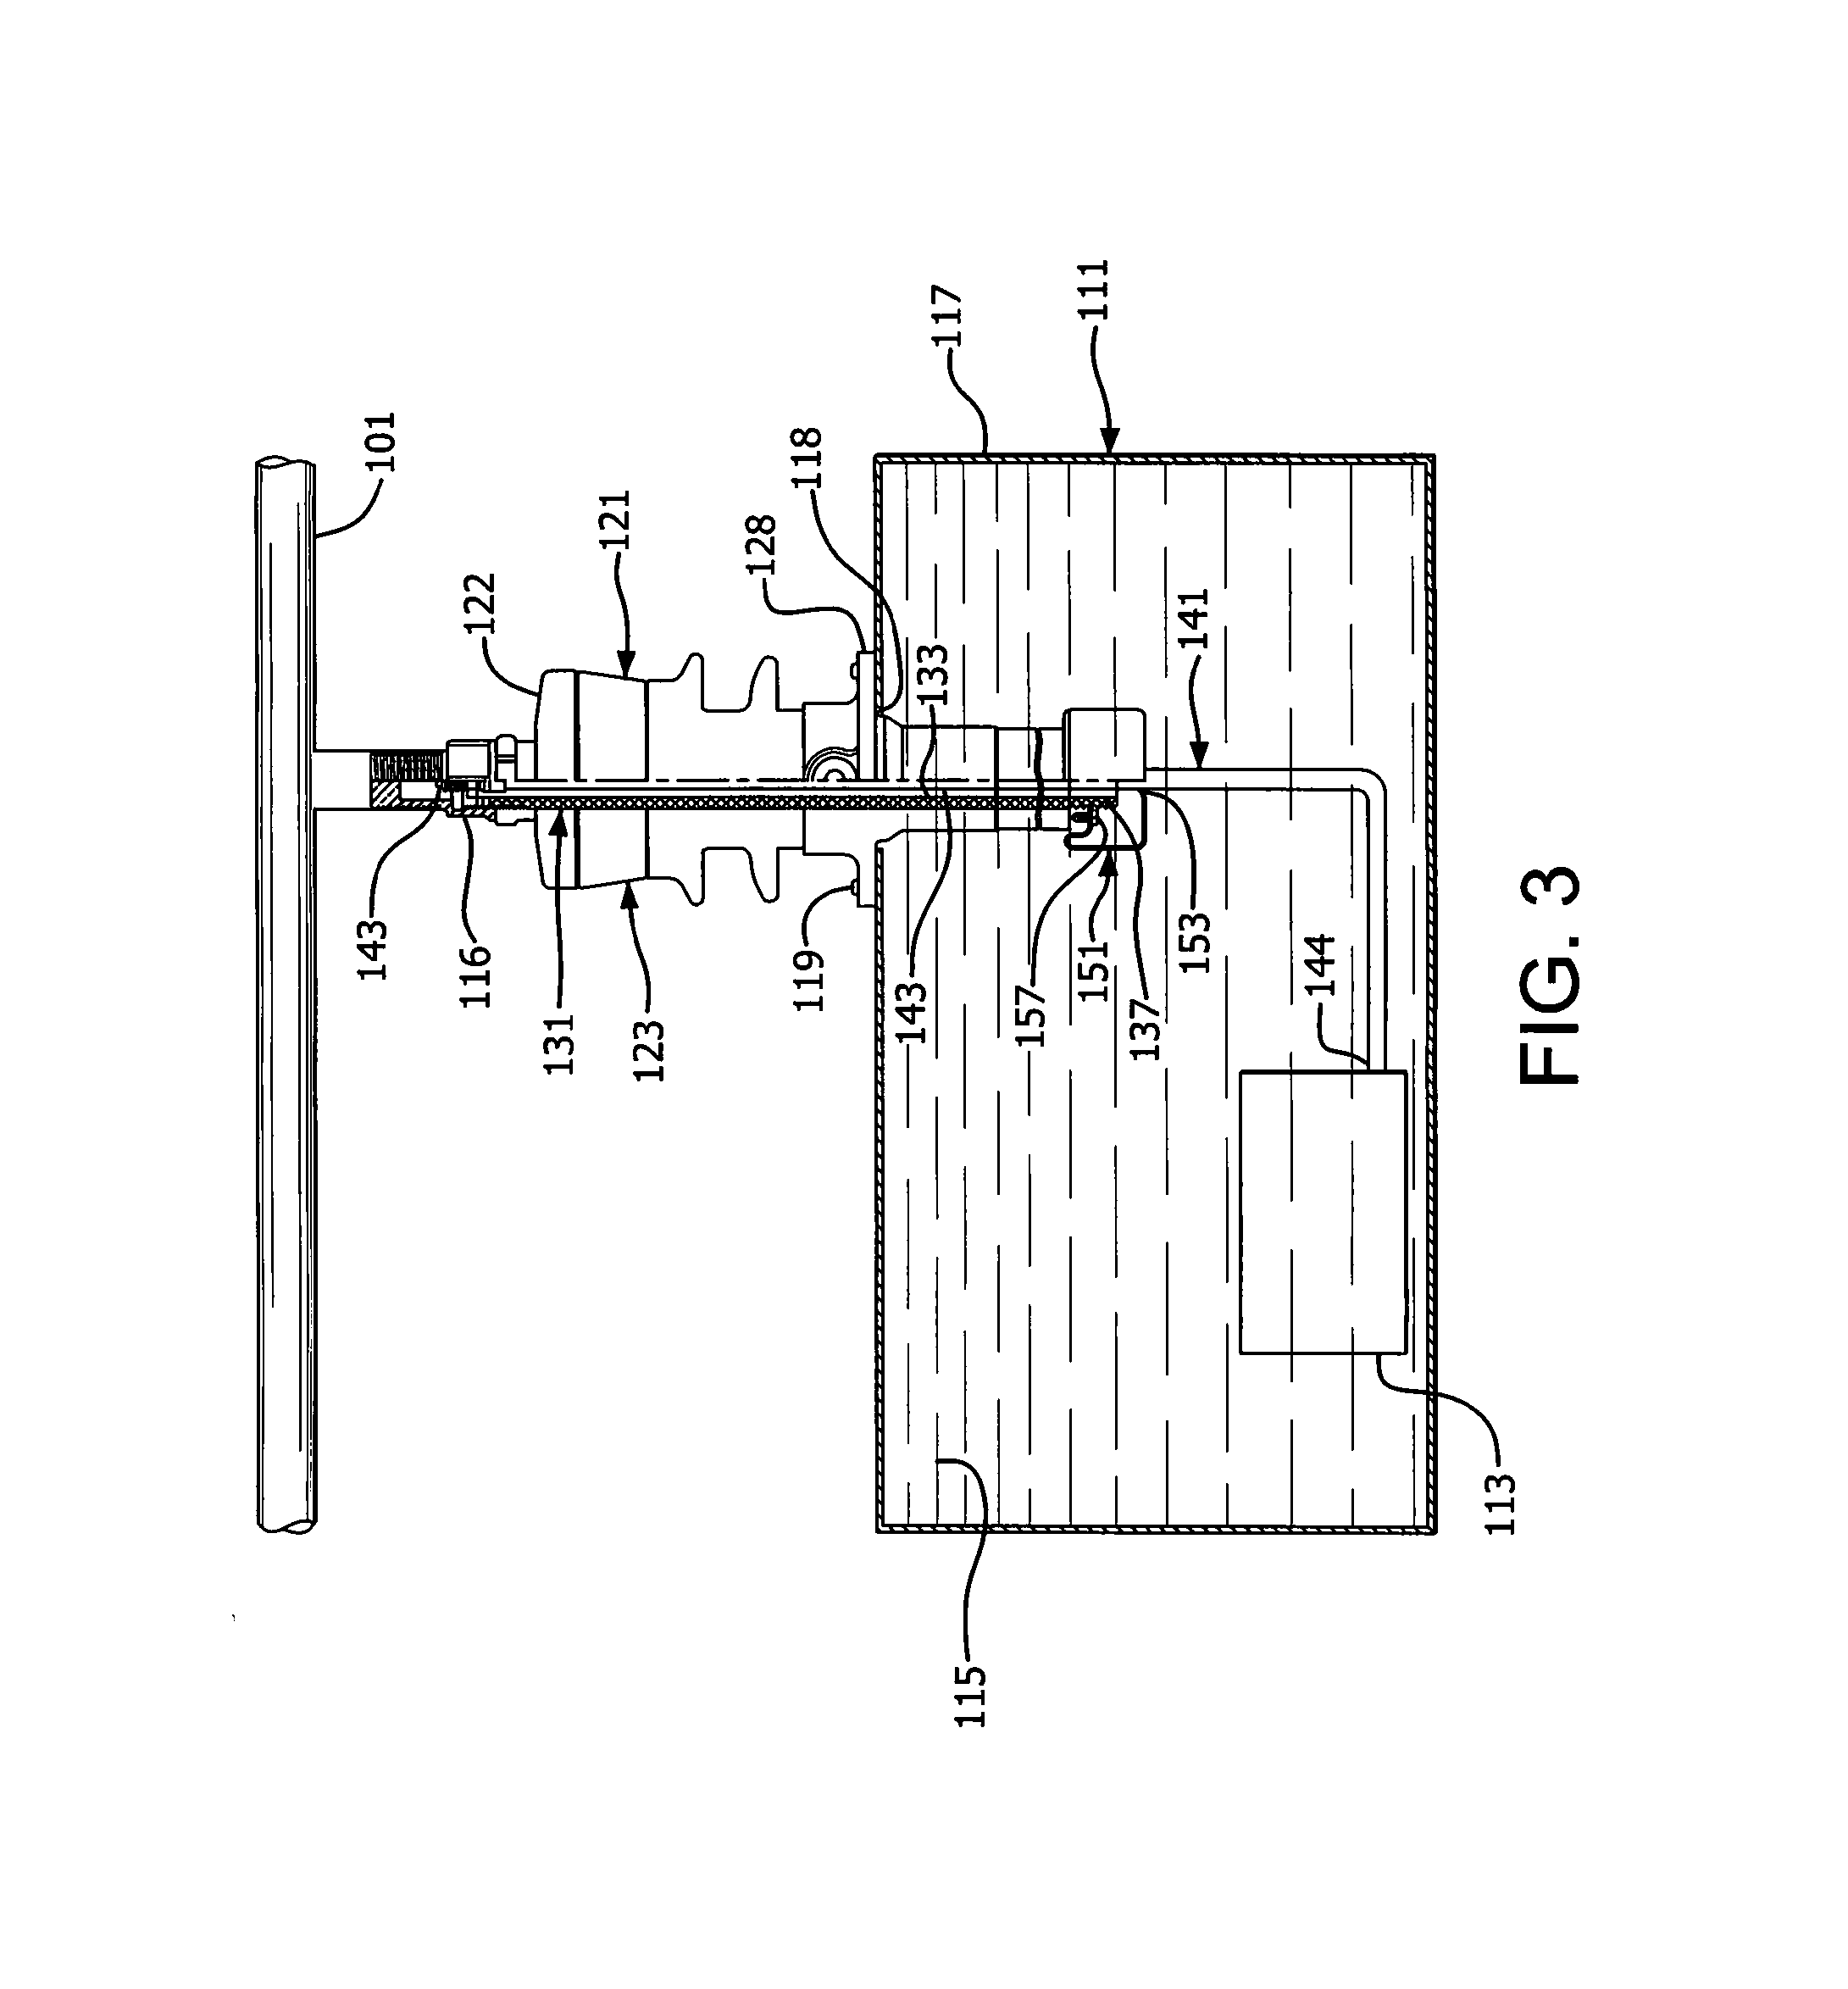 Spark-over prevention device for high-voltage bushing